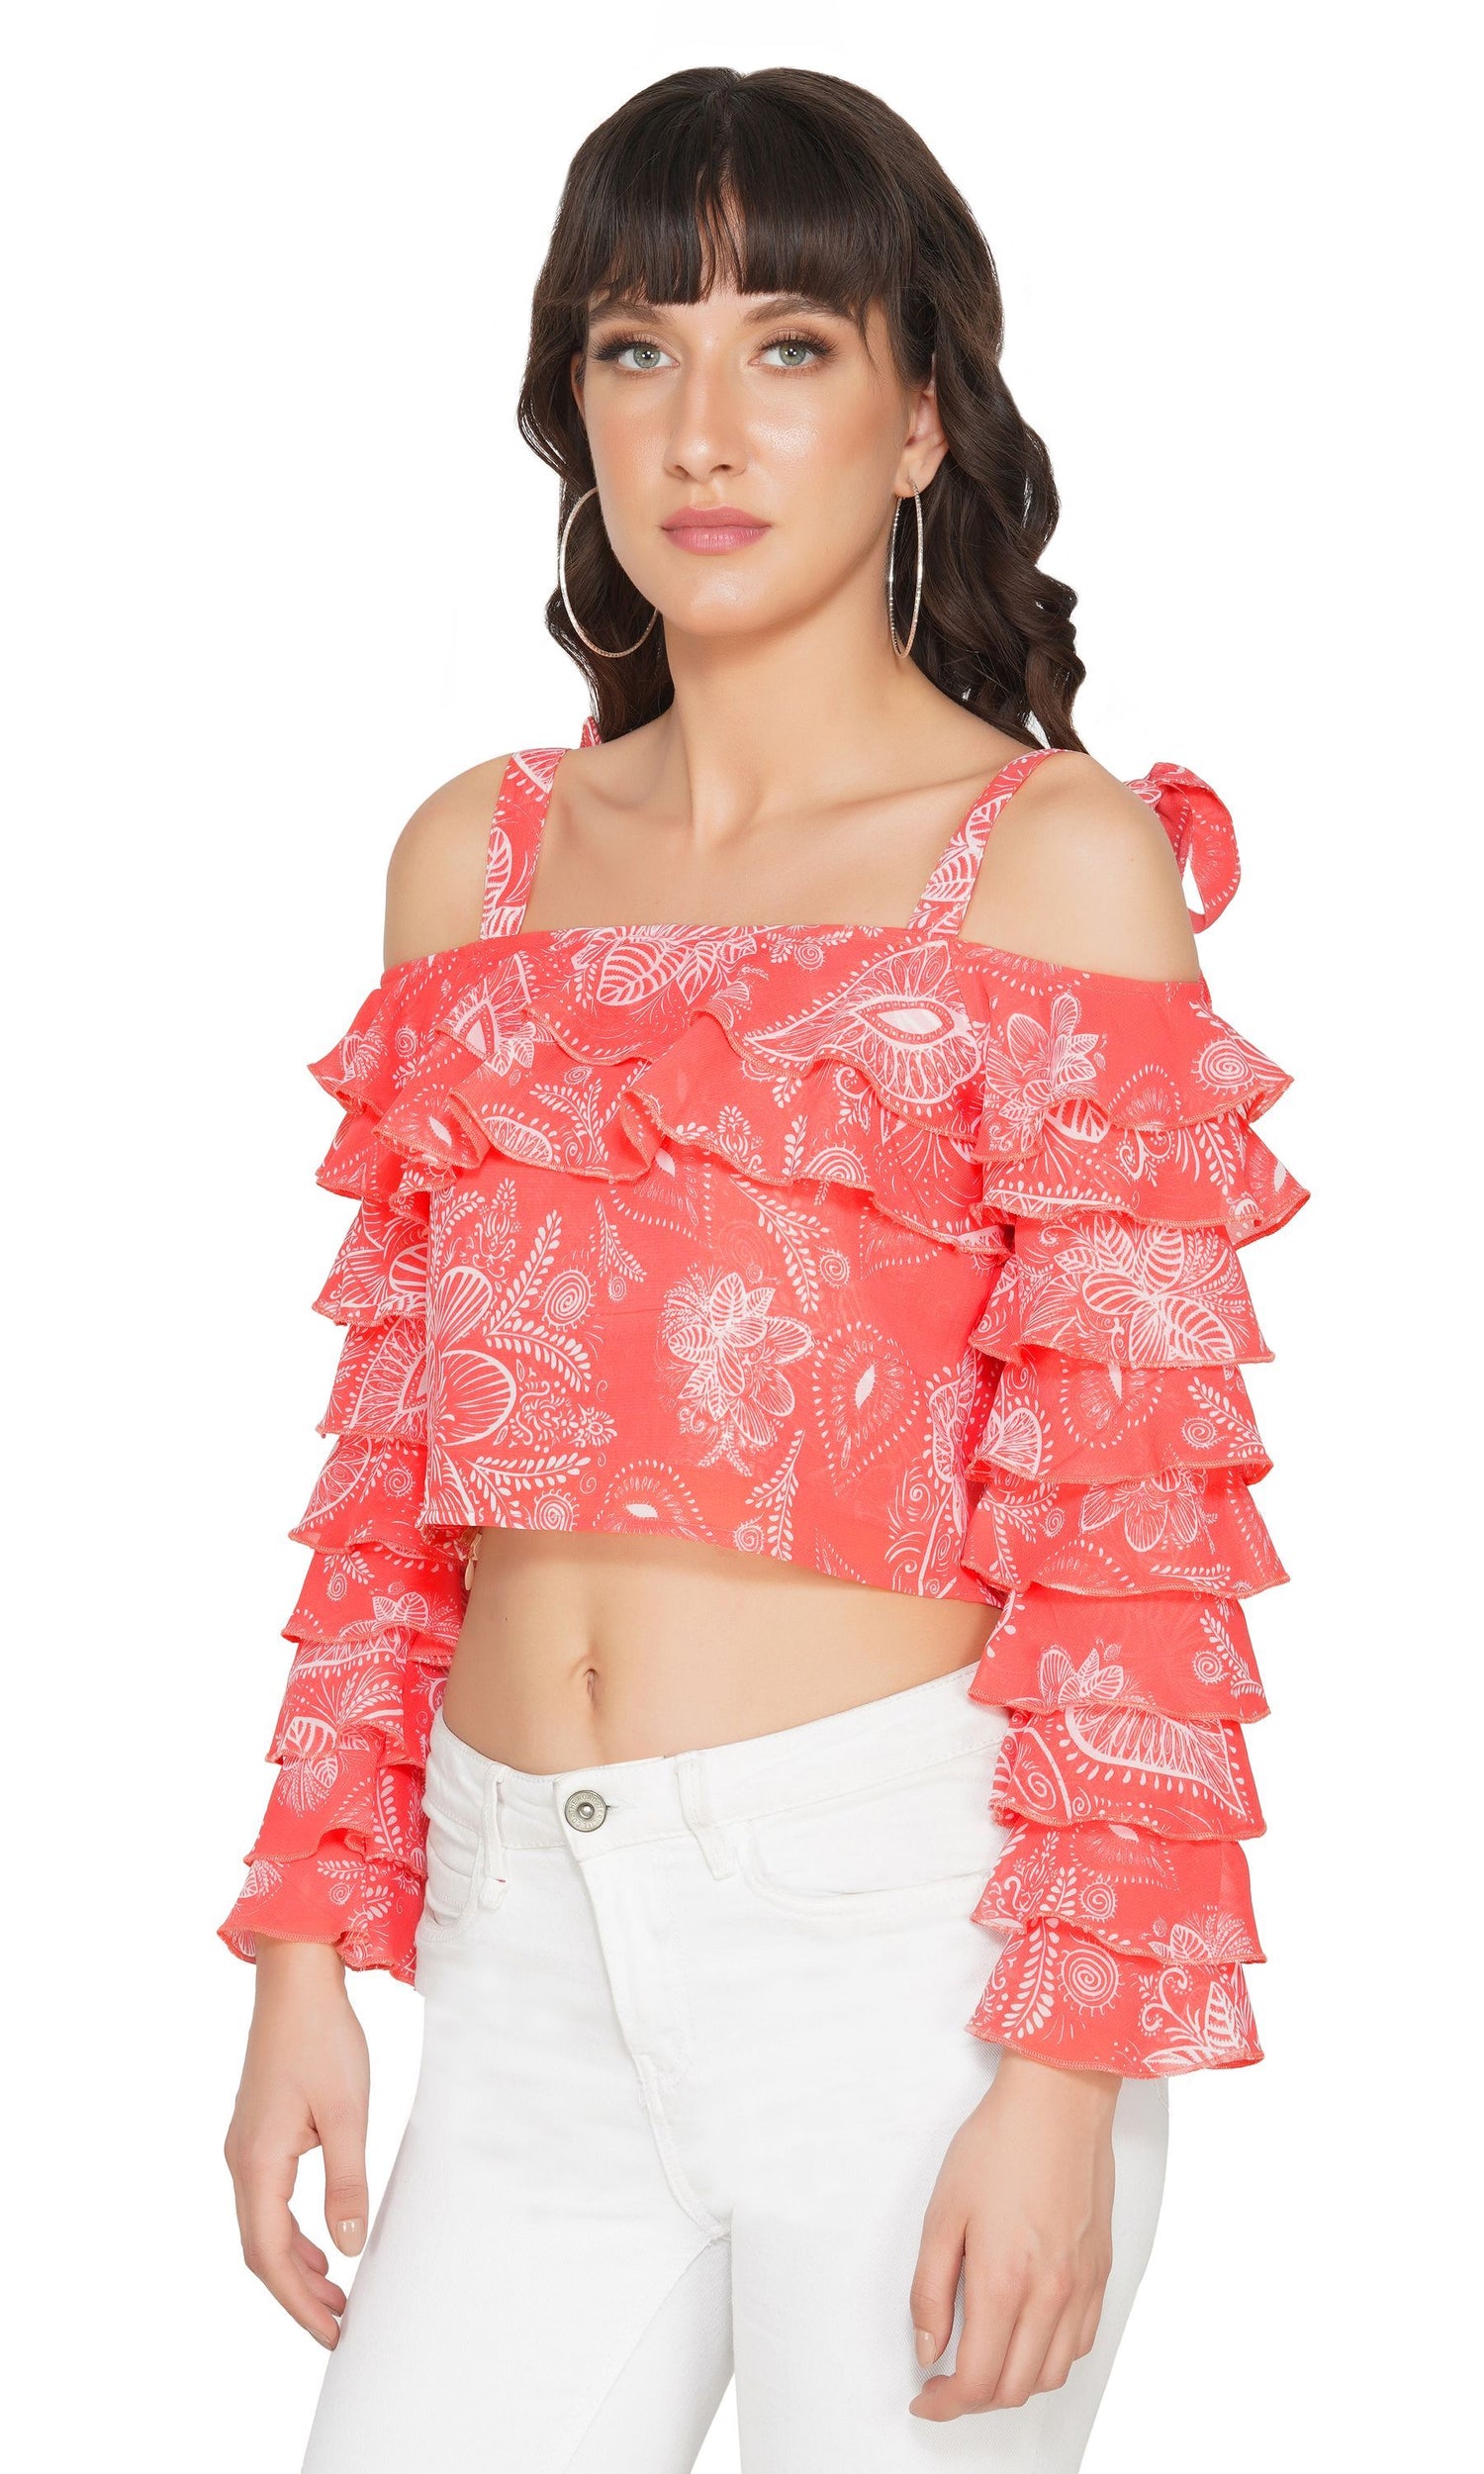 SLAY. Women's Red Paisley Print Strappy Crop Top With Ruffle Sleeve-clothing-to-slay.myshopify.com-Top